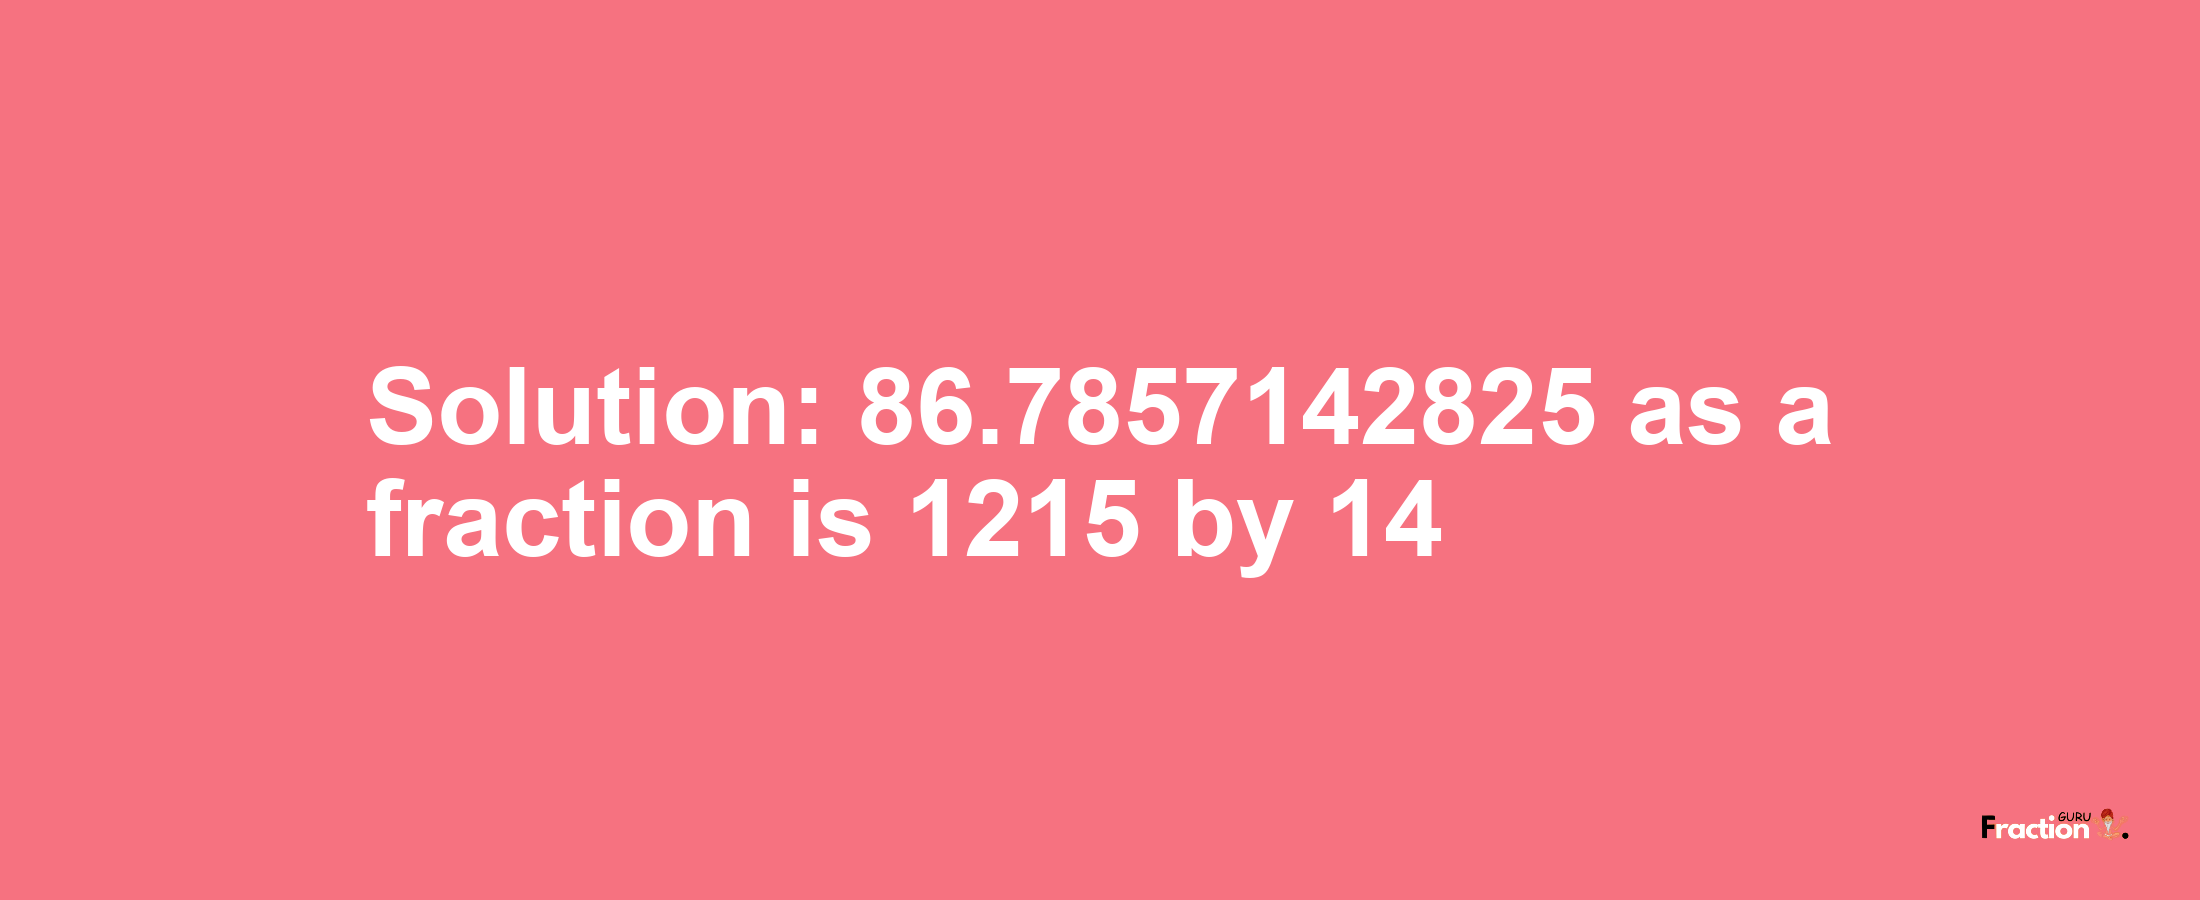 Solution:86.7857142825 as a fraction is 1215/14